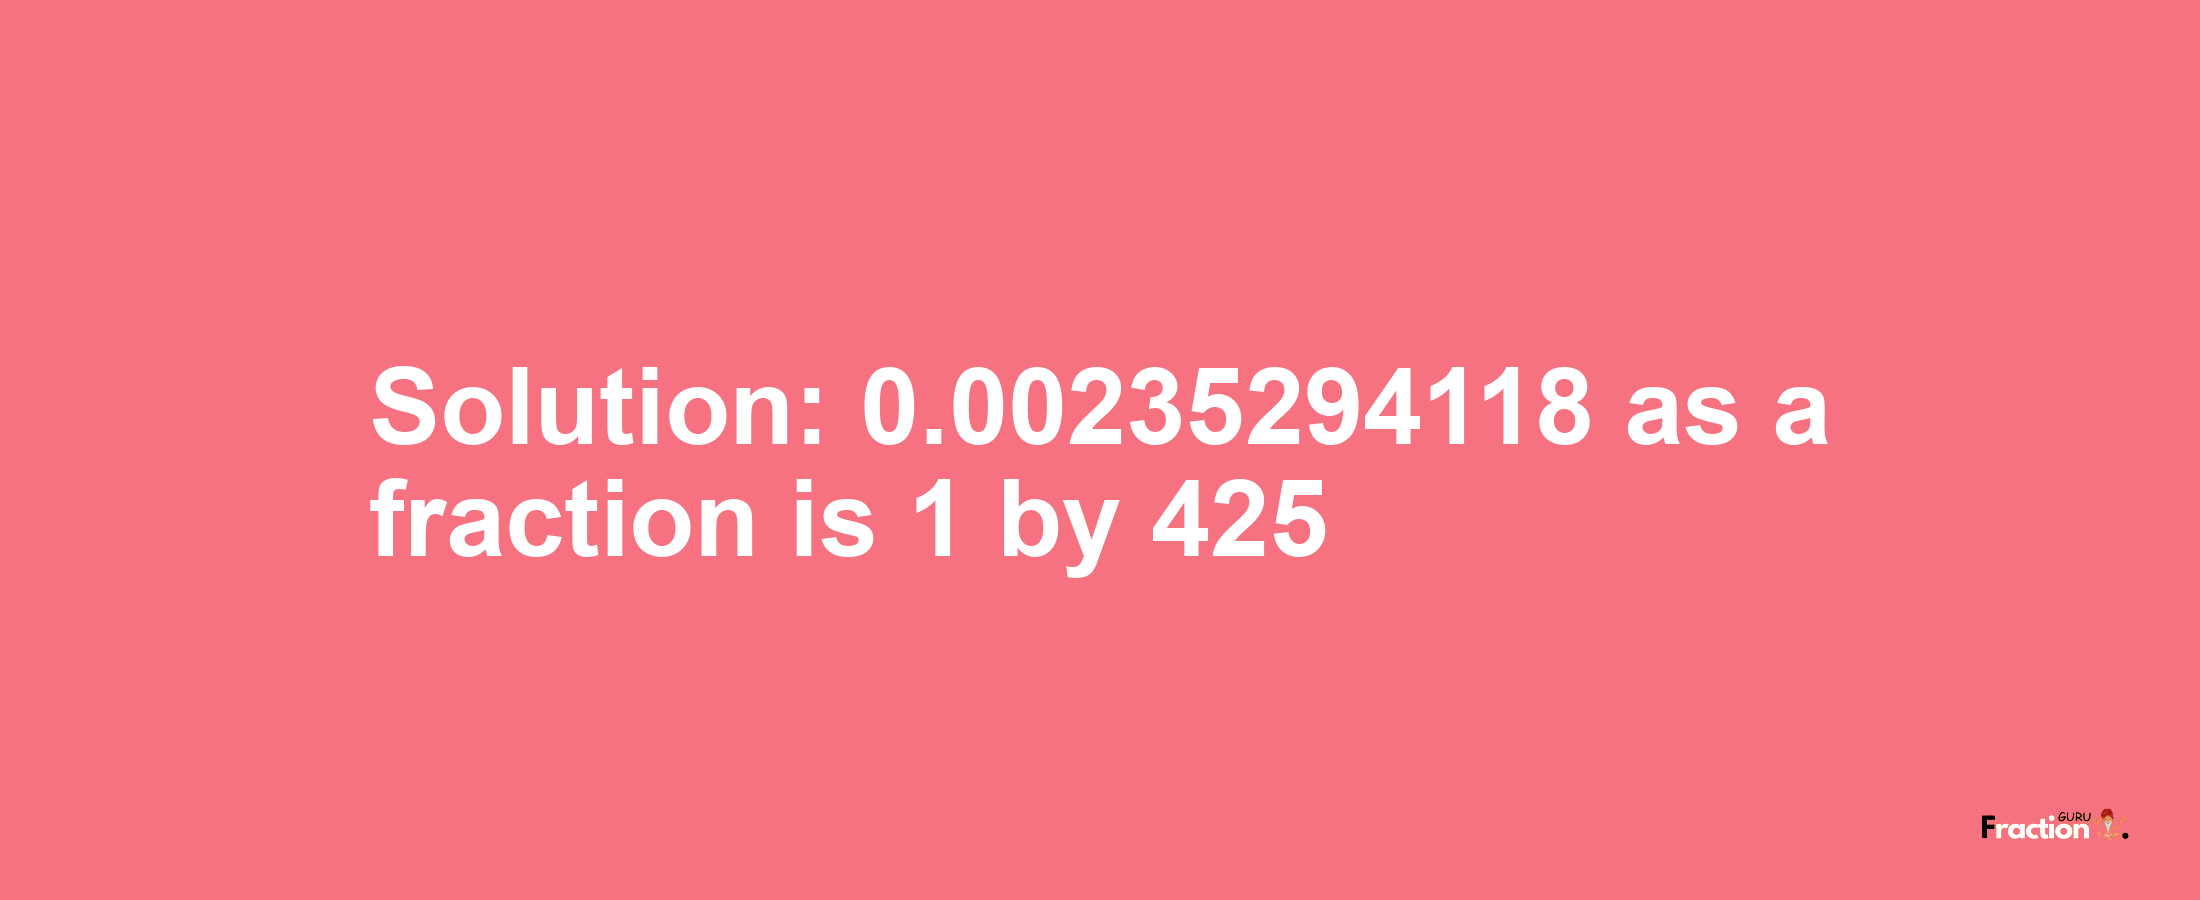 Solution:0.00235294118 as a fraction is 1/425